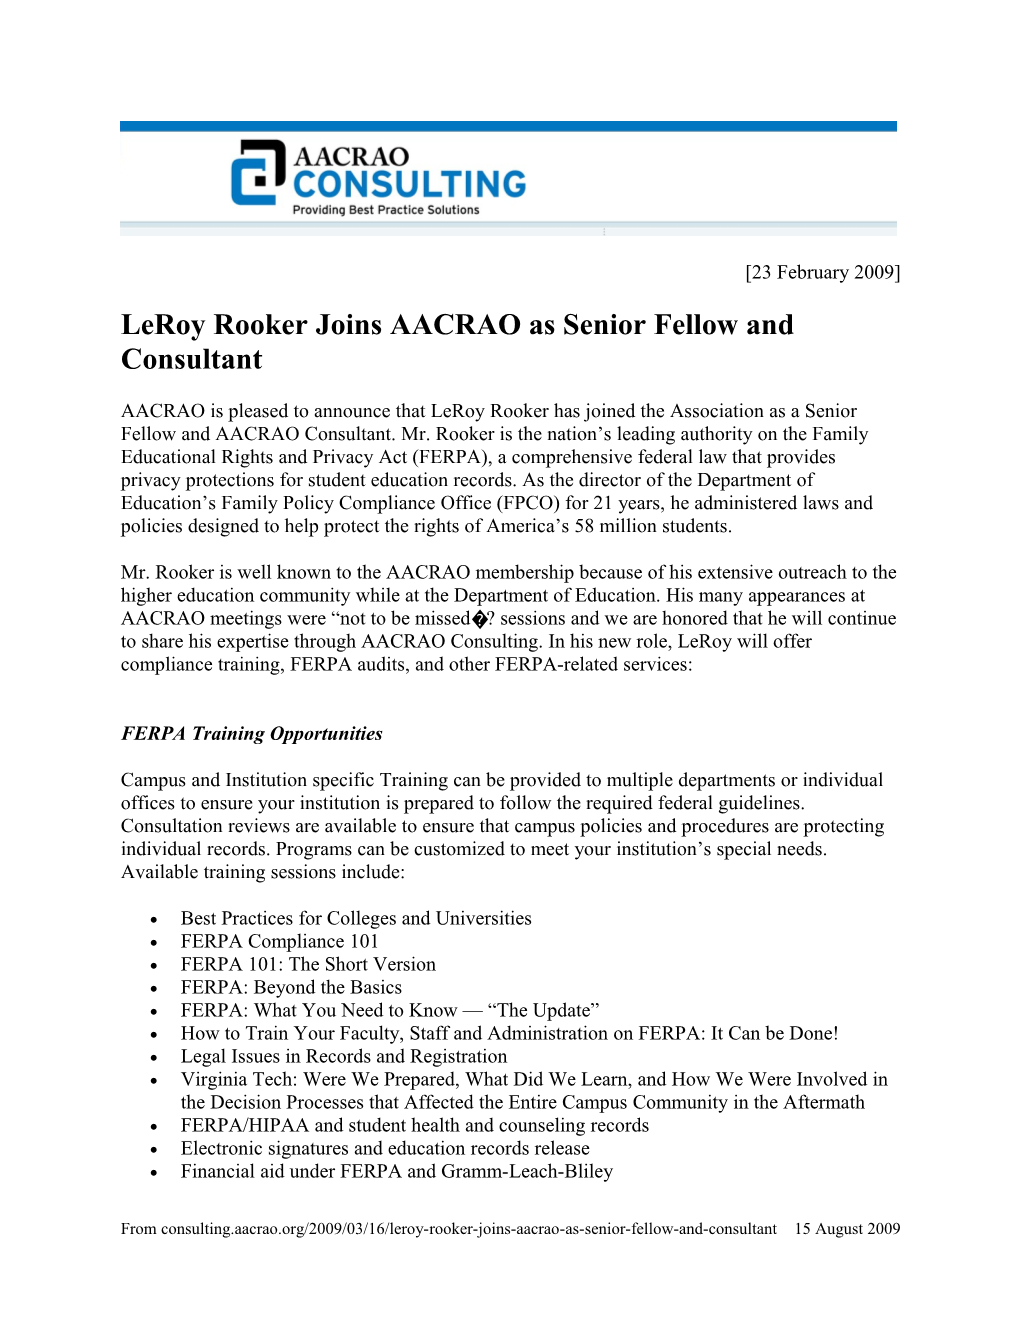 Leroy Rooker Joins AACRAO As Senior Fellow and Consultant